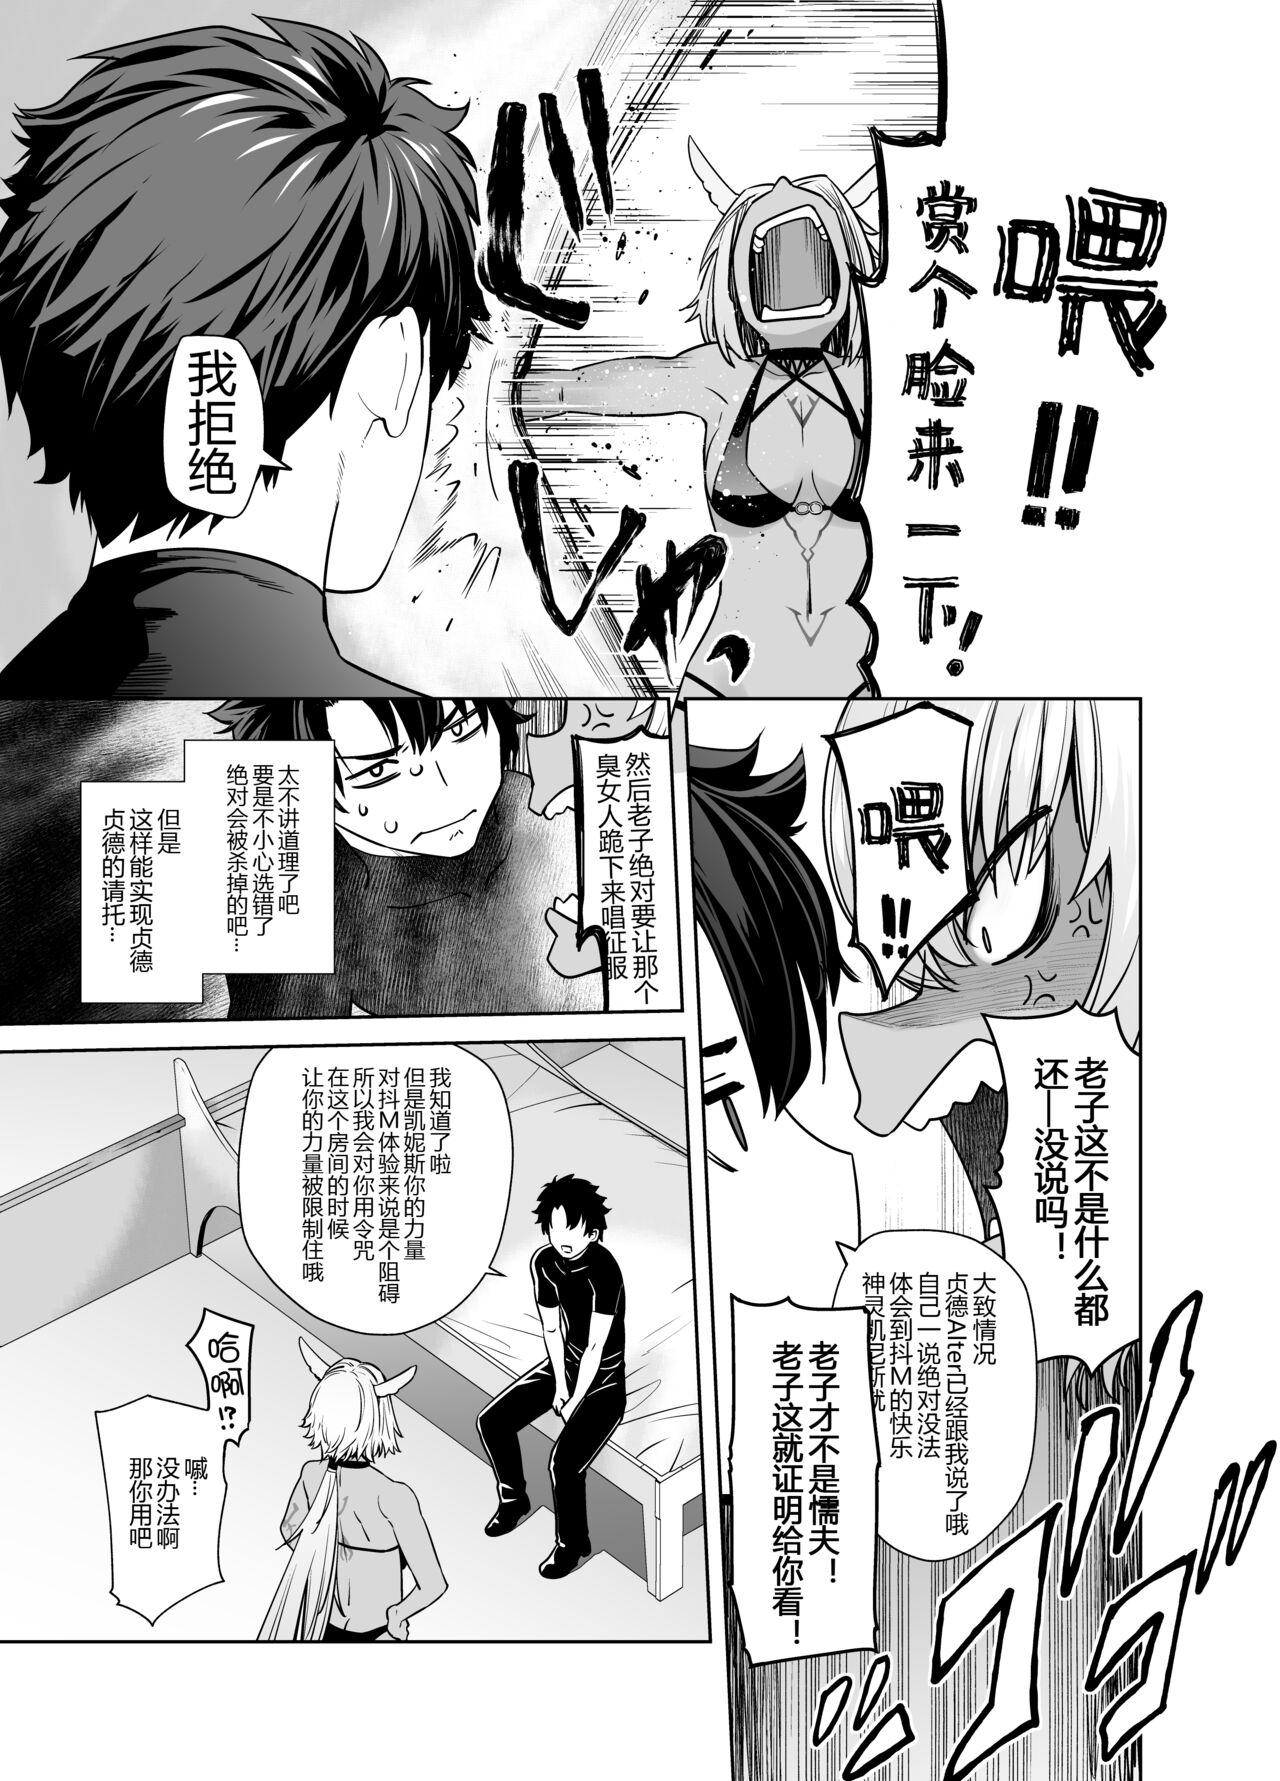 Ball Sucking HEAVEN'S DRIVE 12 - Fate grand order Satin - Page 8